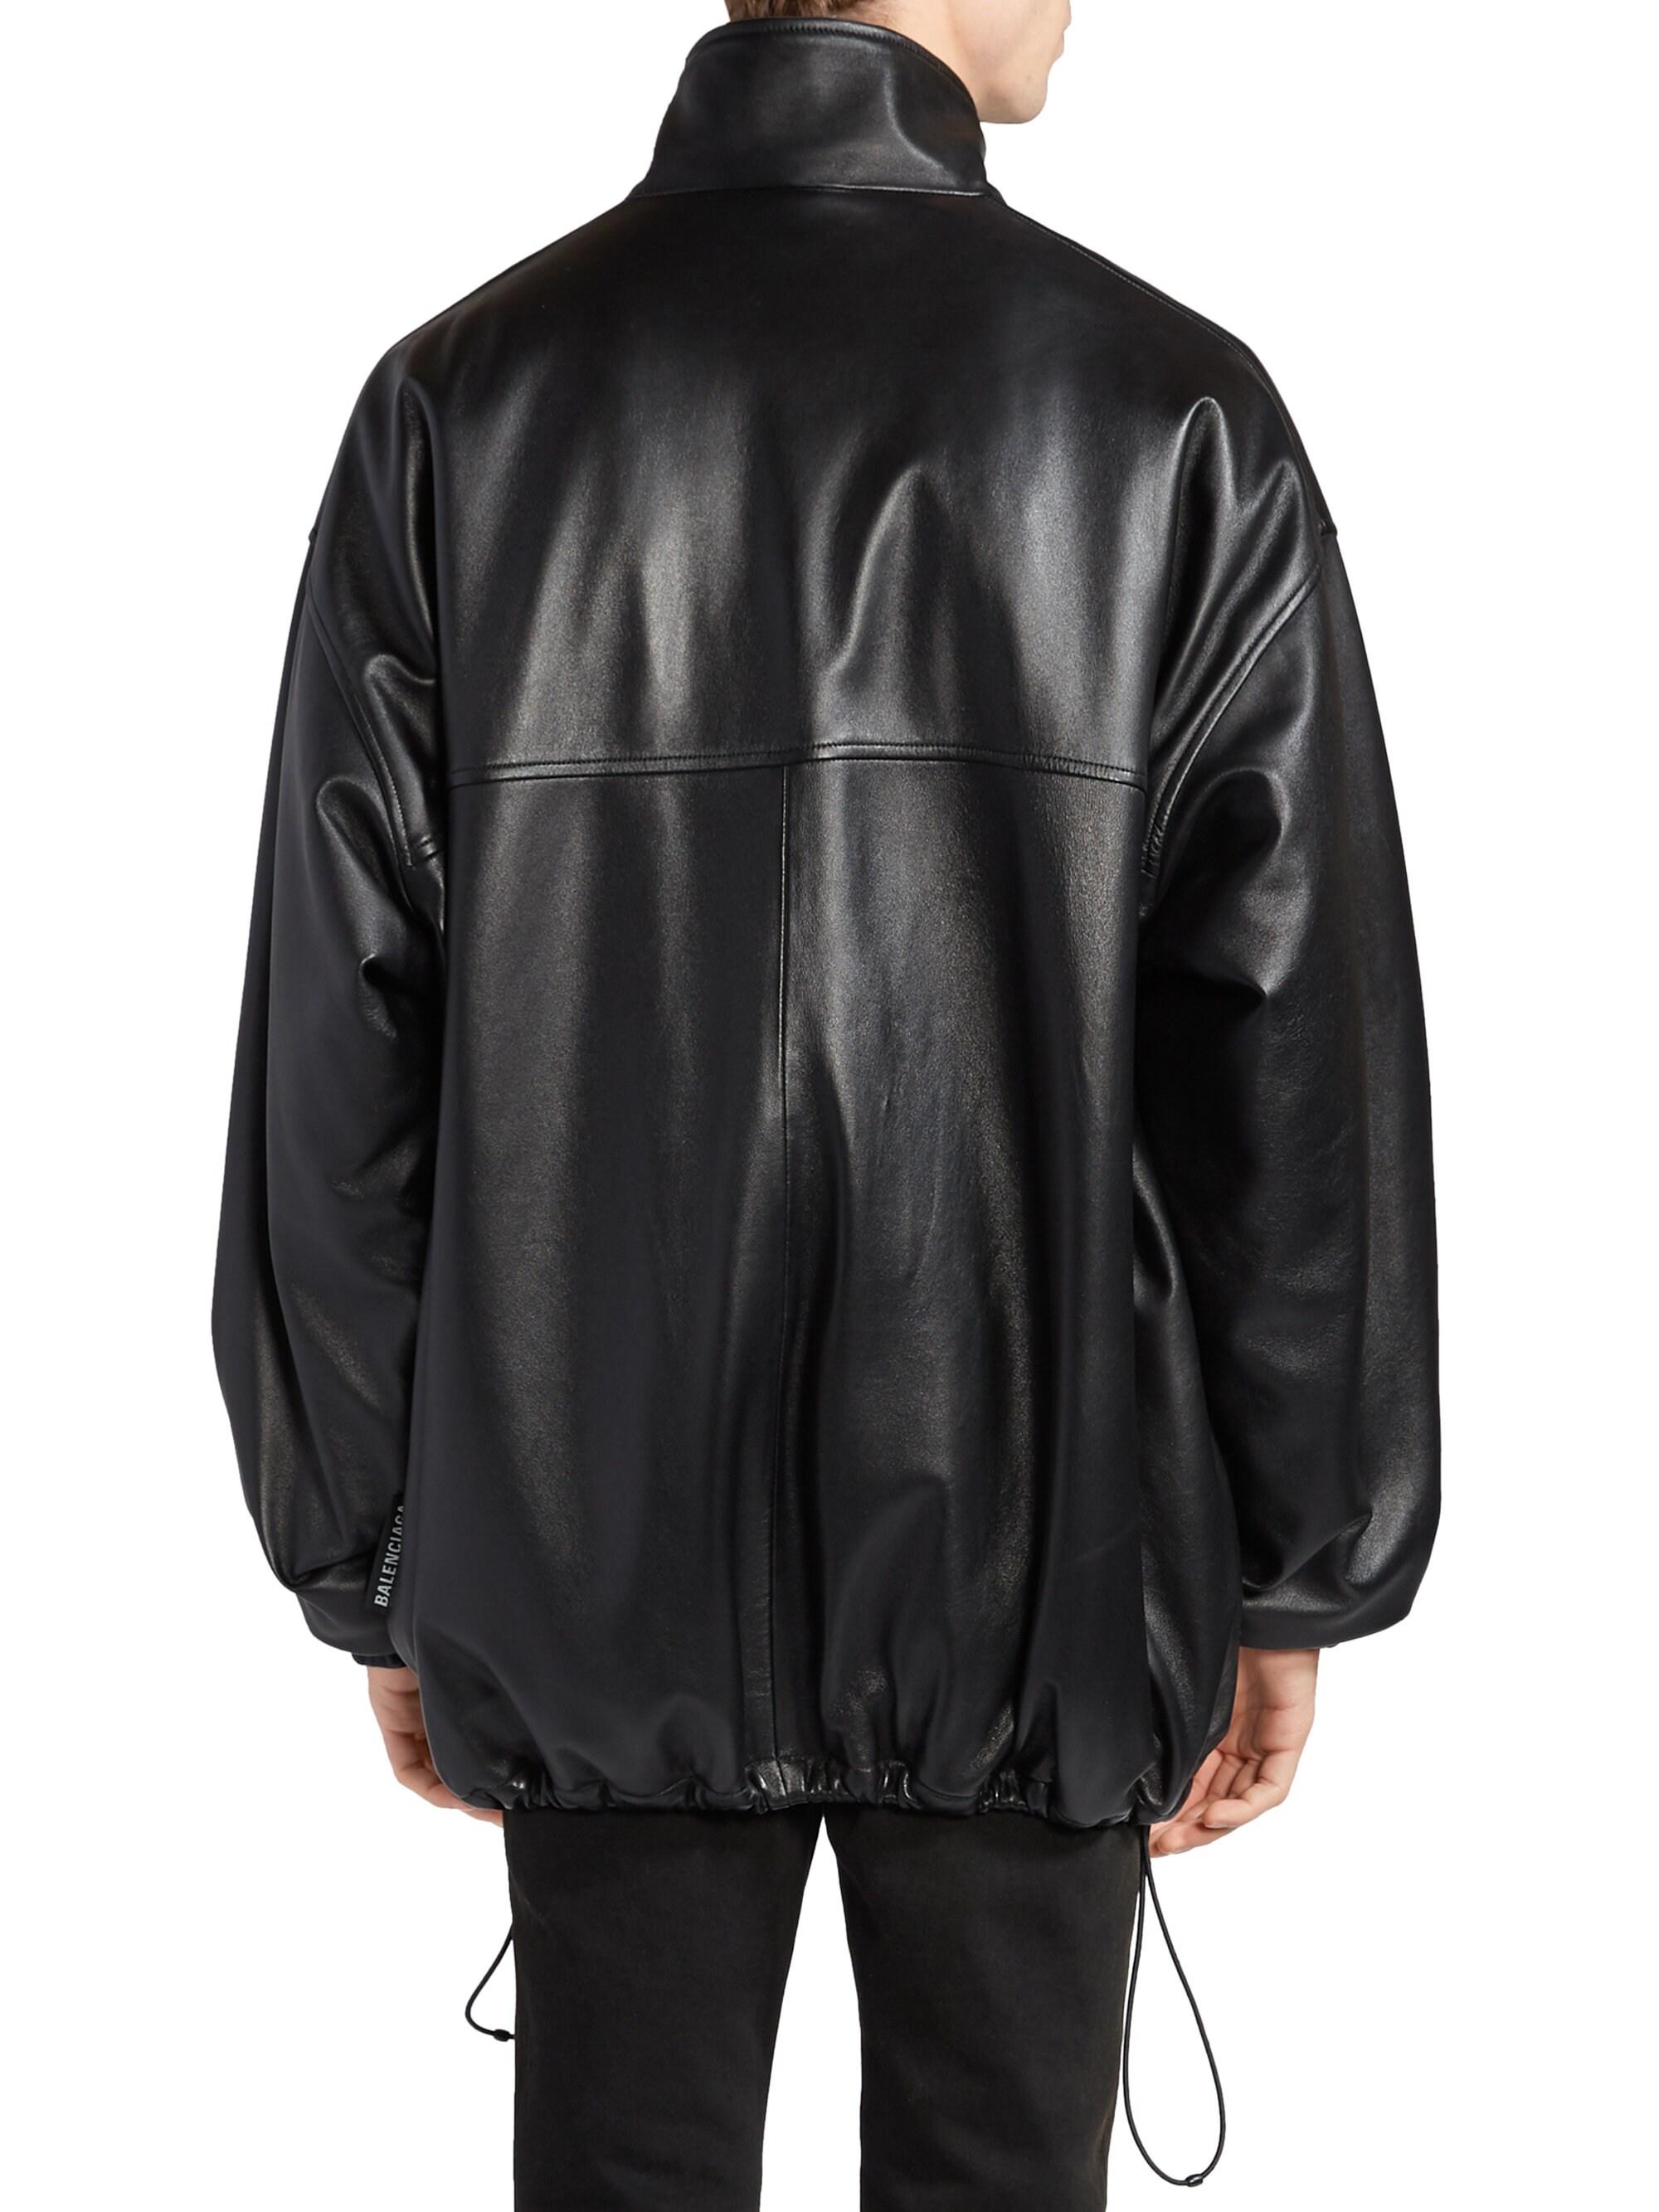 Balenciaga Oversized Leather Track Jacket in Black for Men - Lyst